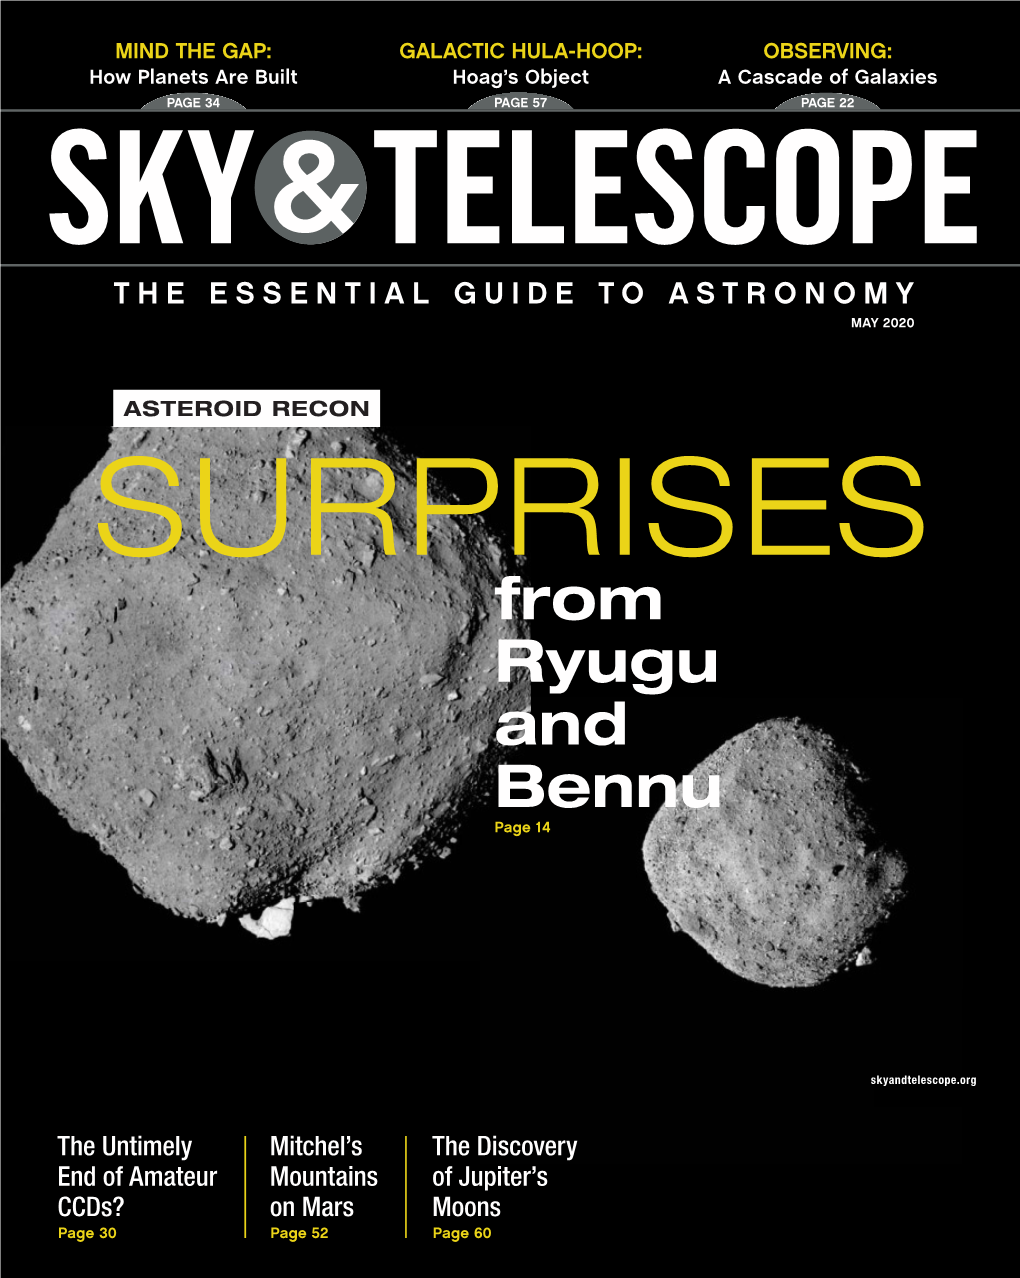 From Ryugu and Bennu Page 14